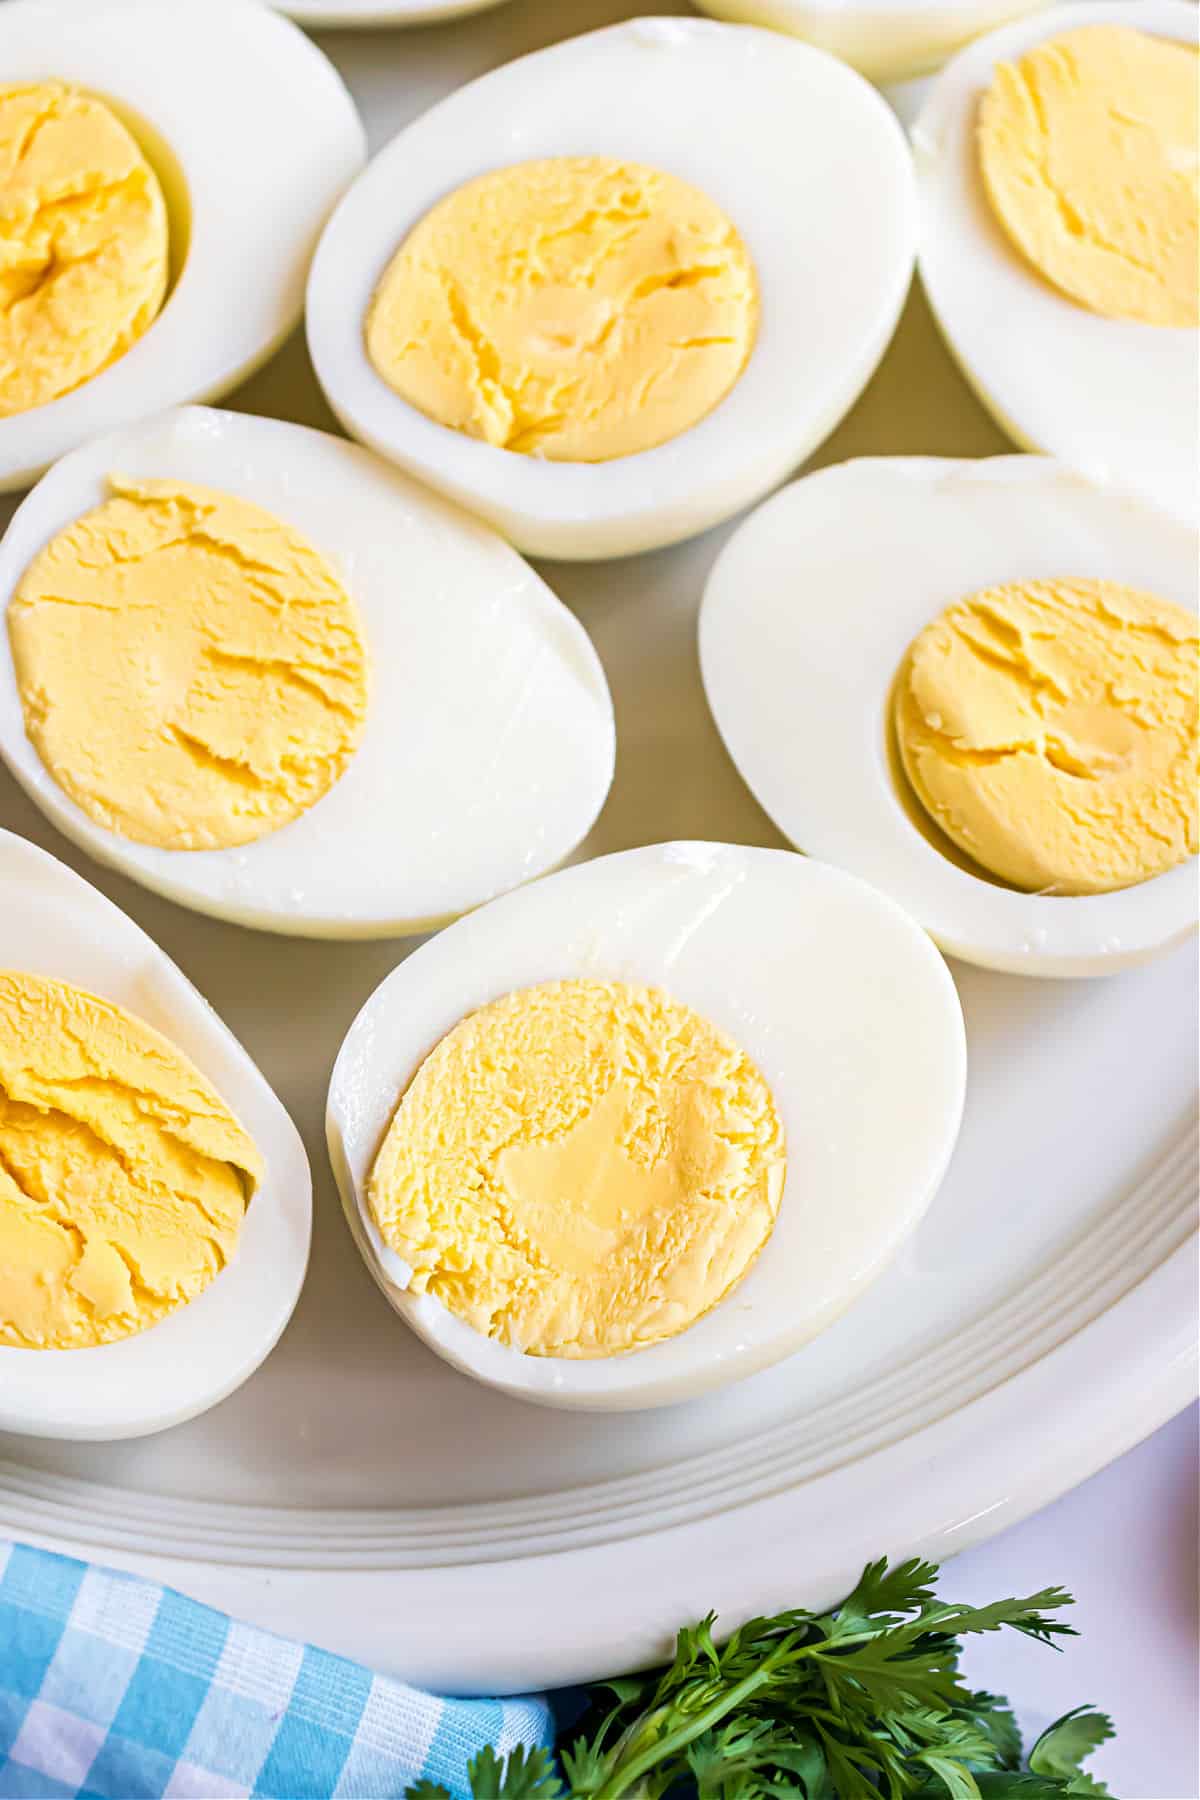 Hard boiled eggs on a white plate, cut in half.